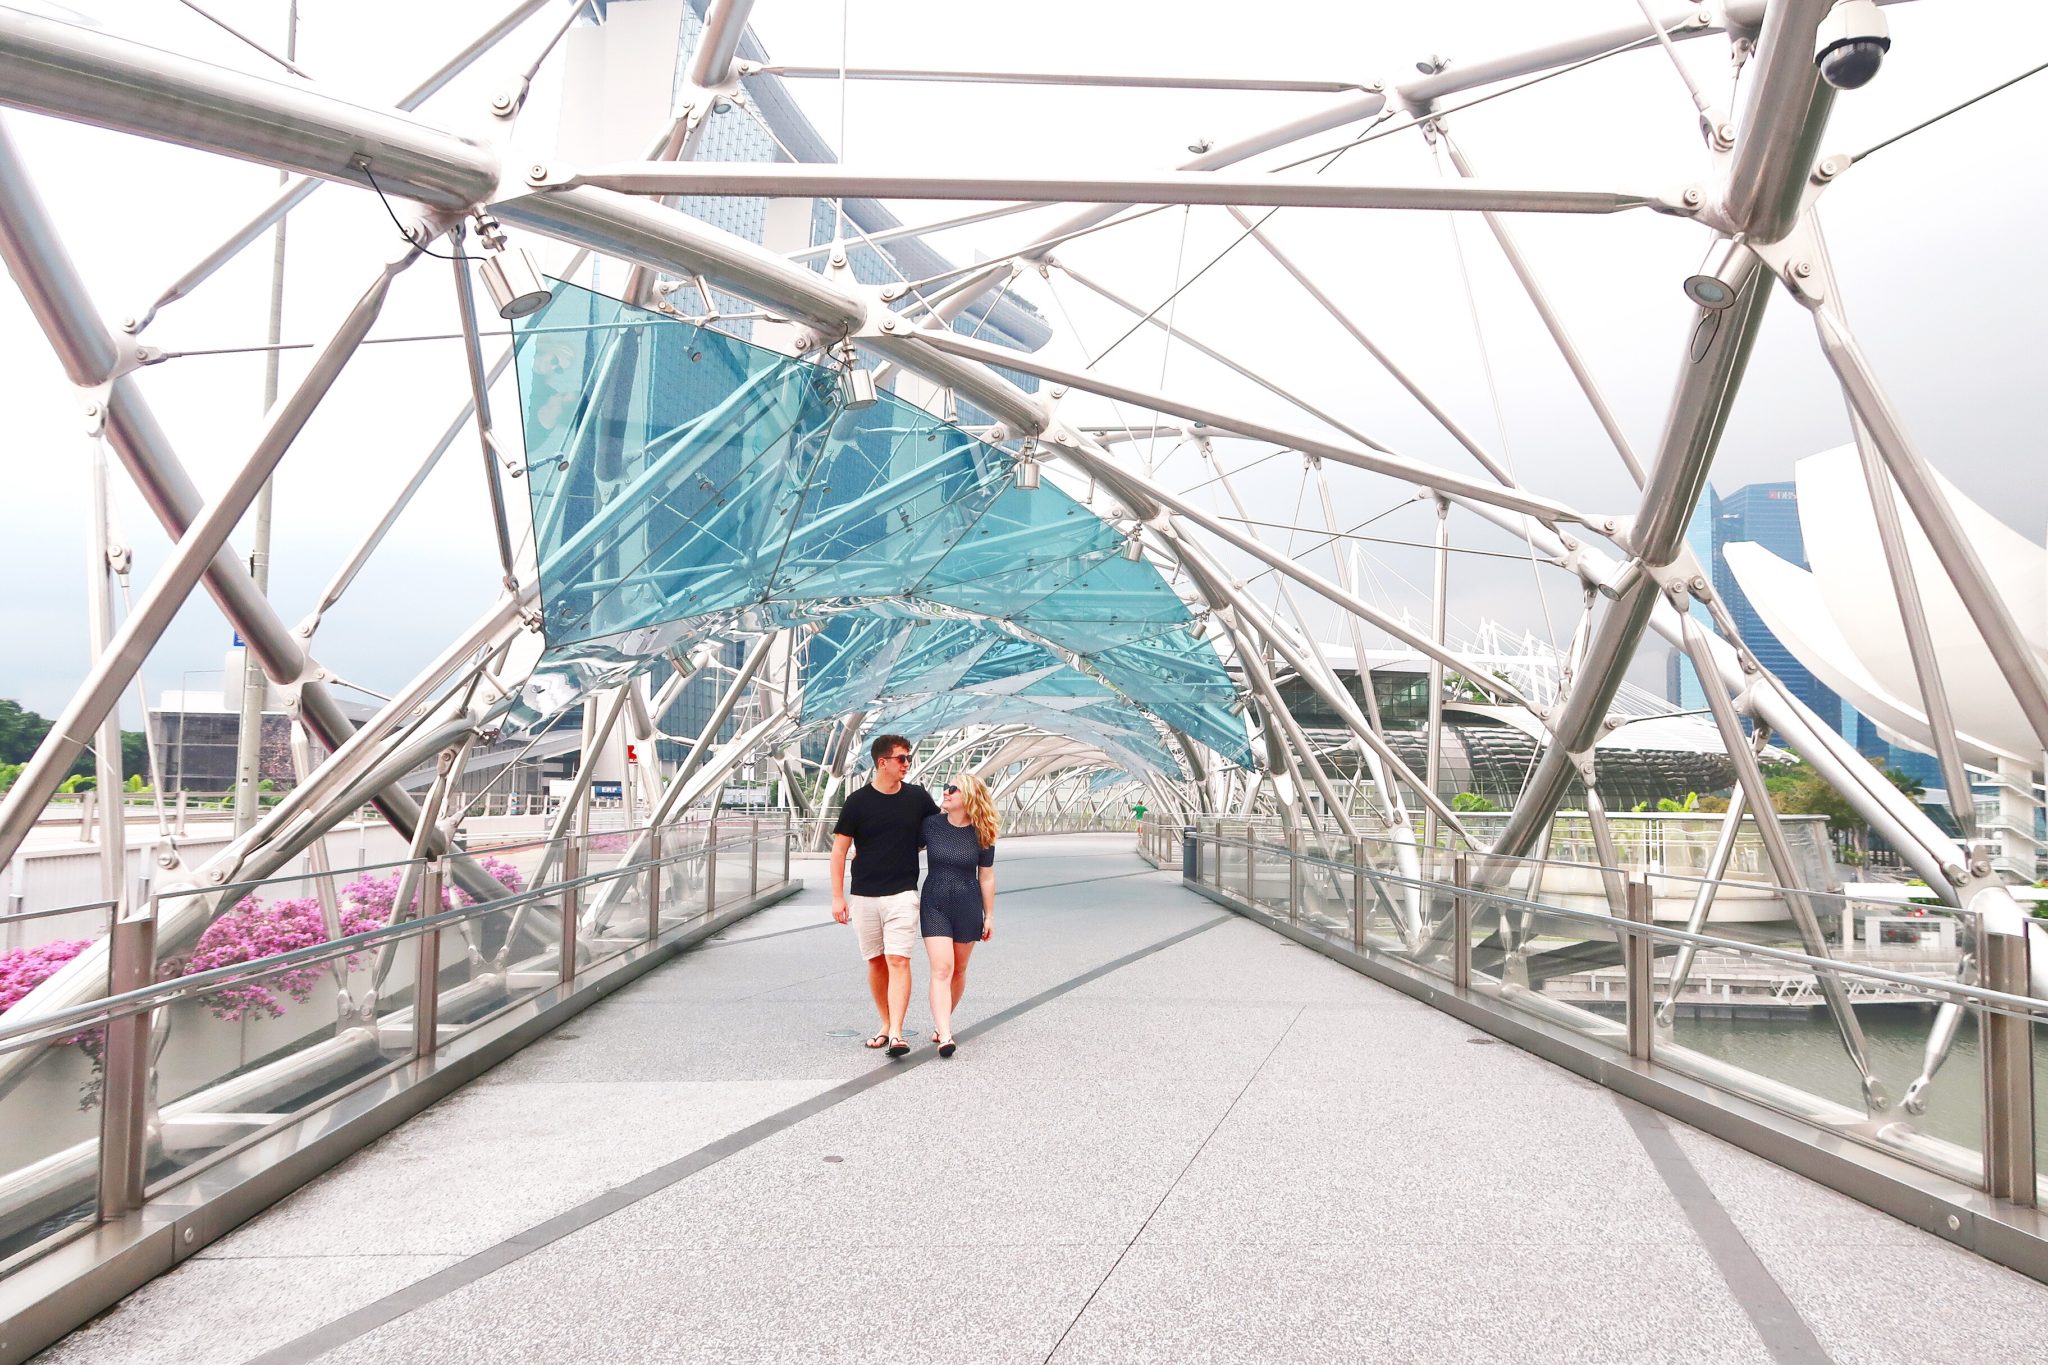 What to do in Singapore - Helix Bridge 